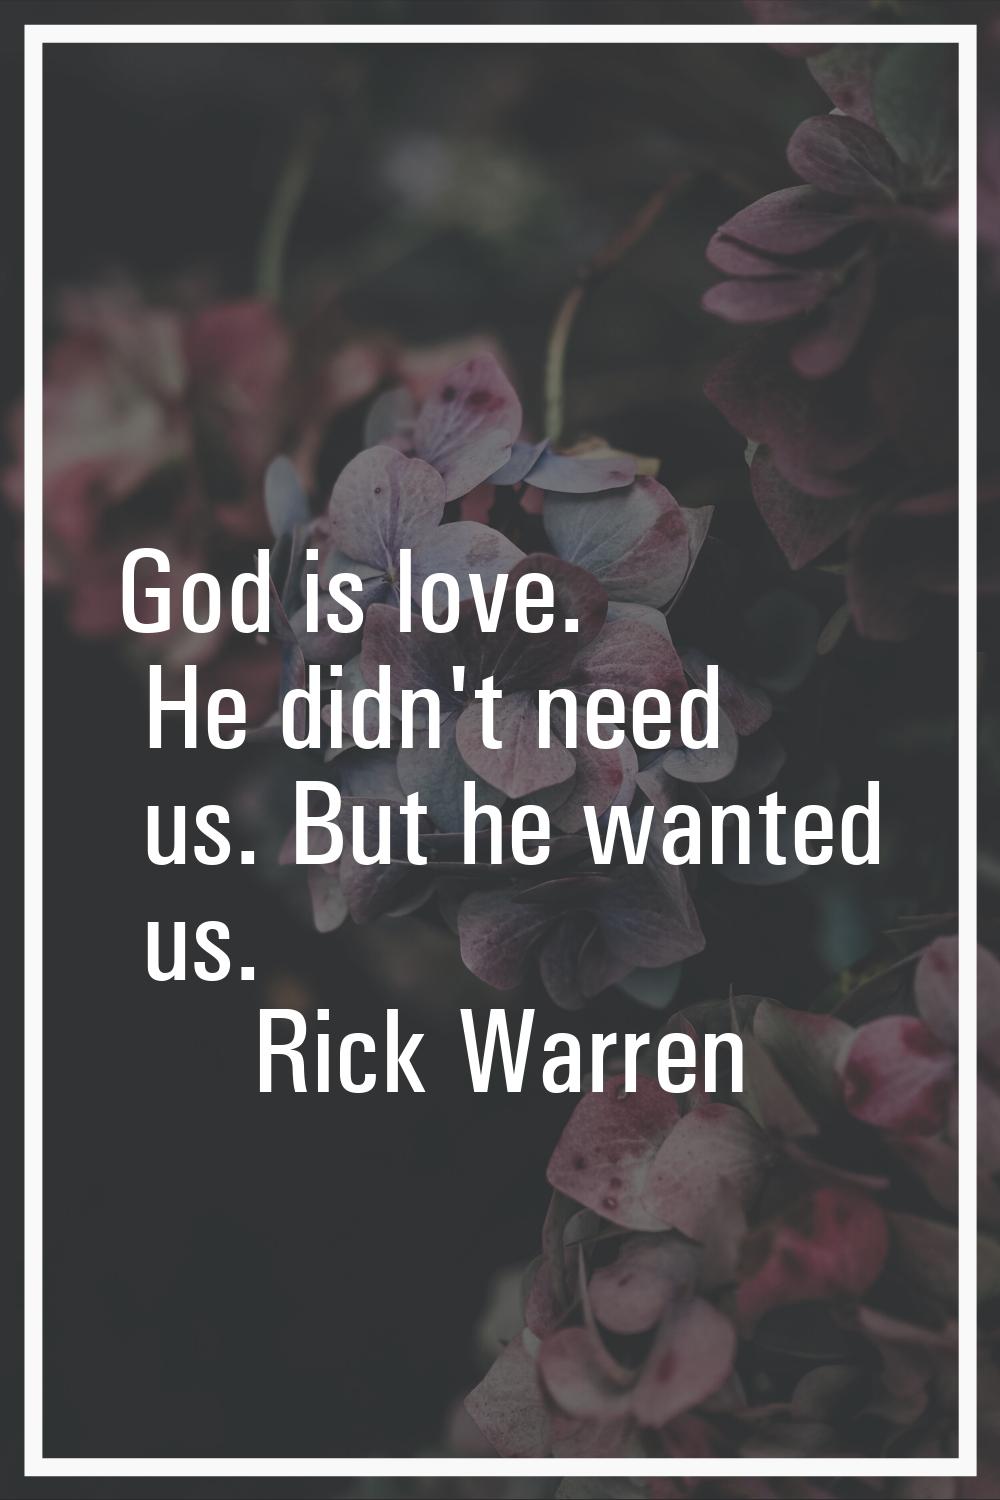 God is love. He didn't need us. But he wanted us.